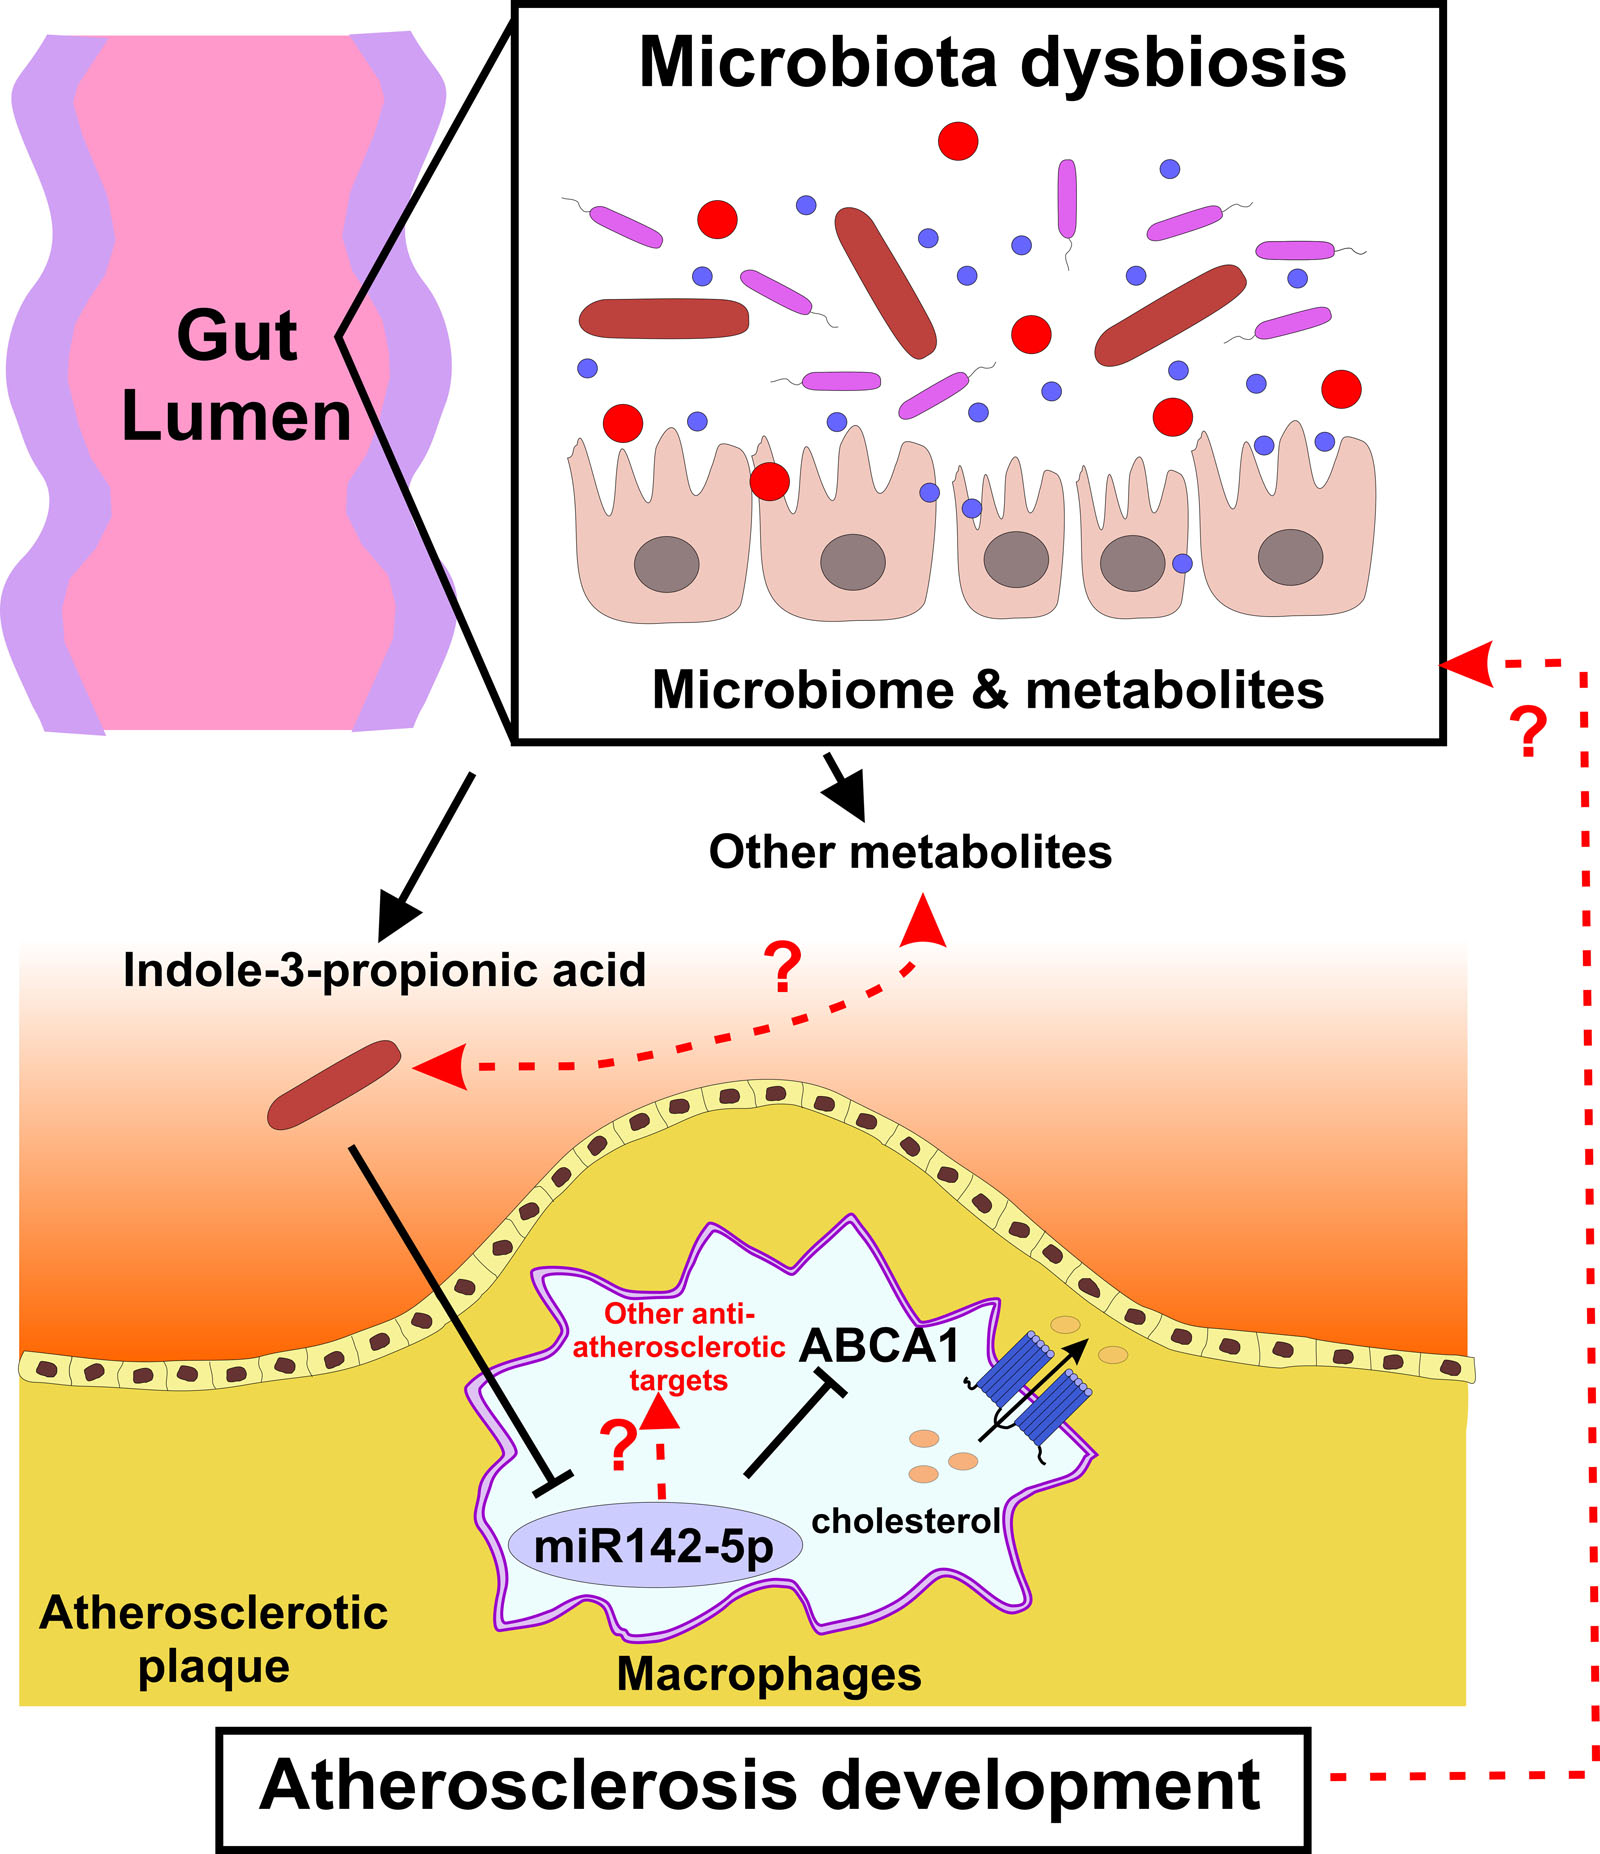 Beyond Diagnosis: a Novel Microbiota Dependent Biomarker and Target for Atherosclerosis